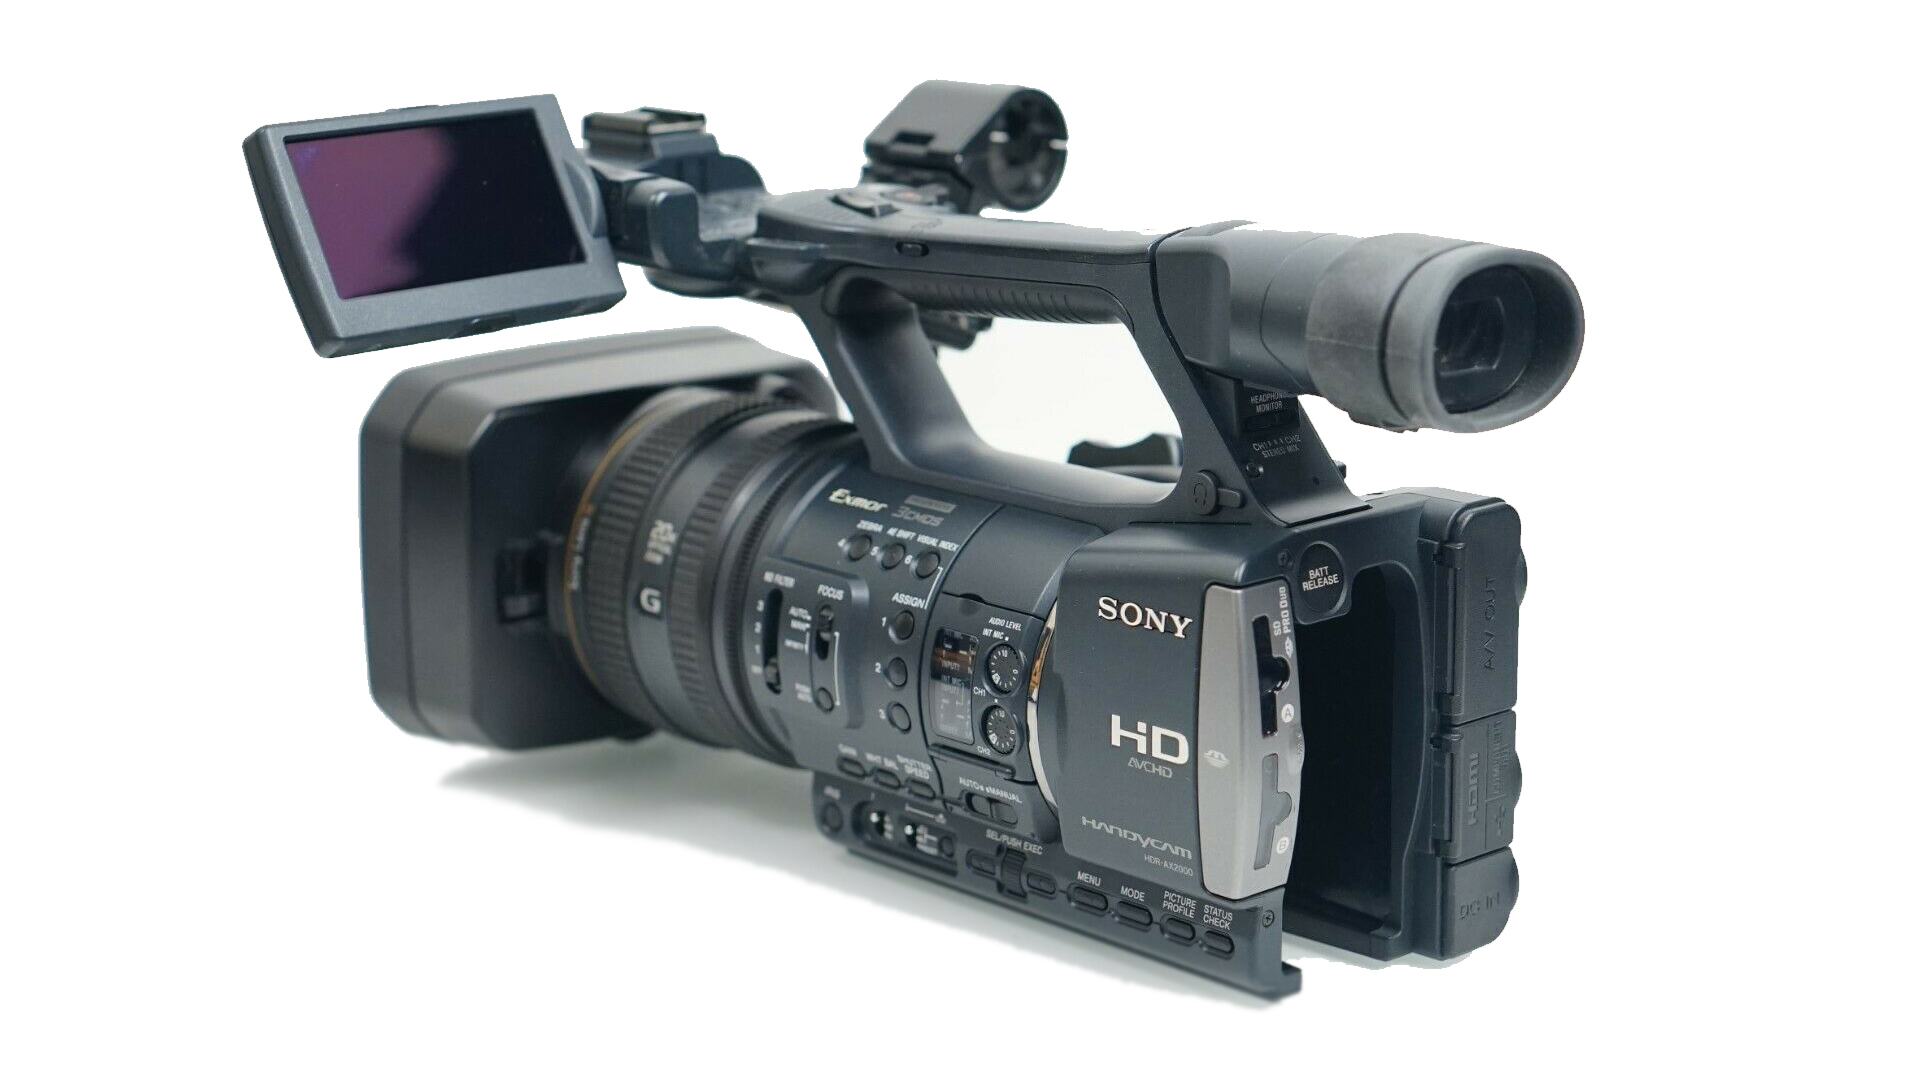 Hire Sony HDR-AX2000 professional TV camera in Cardiff, Newport, Swansea, Carmarthenshire, Pembrokeshire & South West Wales